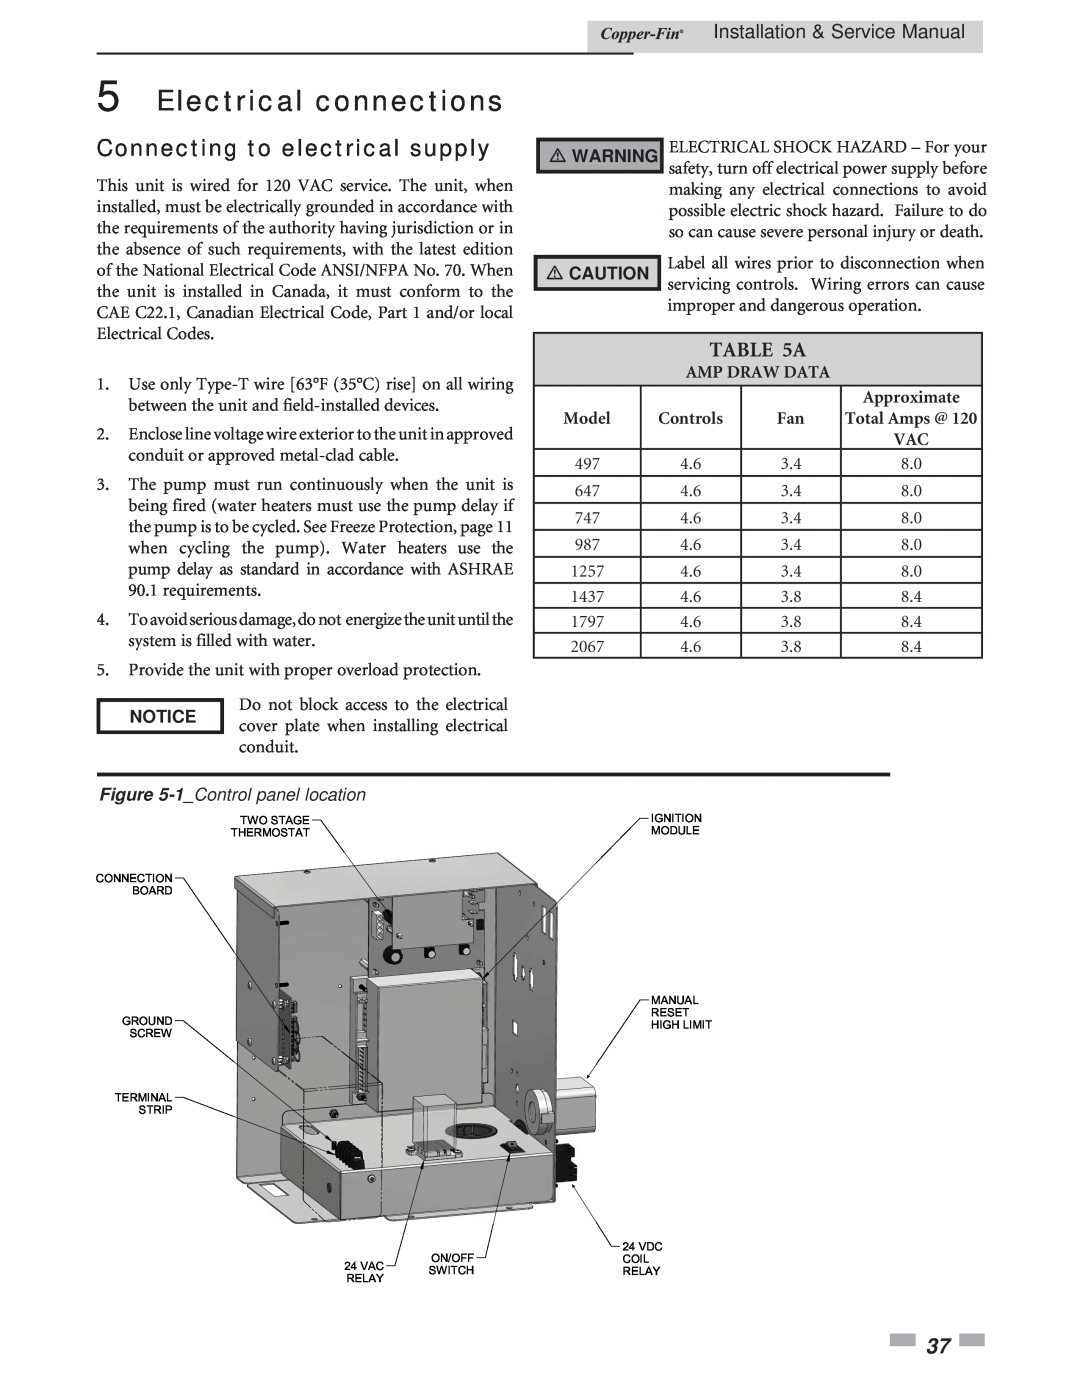 Lochinvar 497 - 2067 service manual Electrical connections, Connecting to electrical supply, A, 1_Controlpanel location 